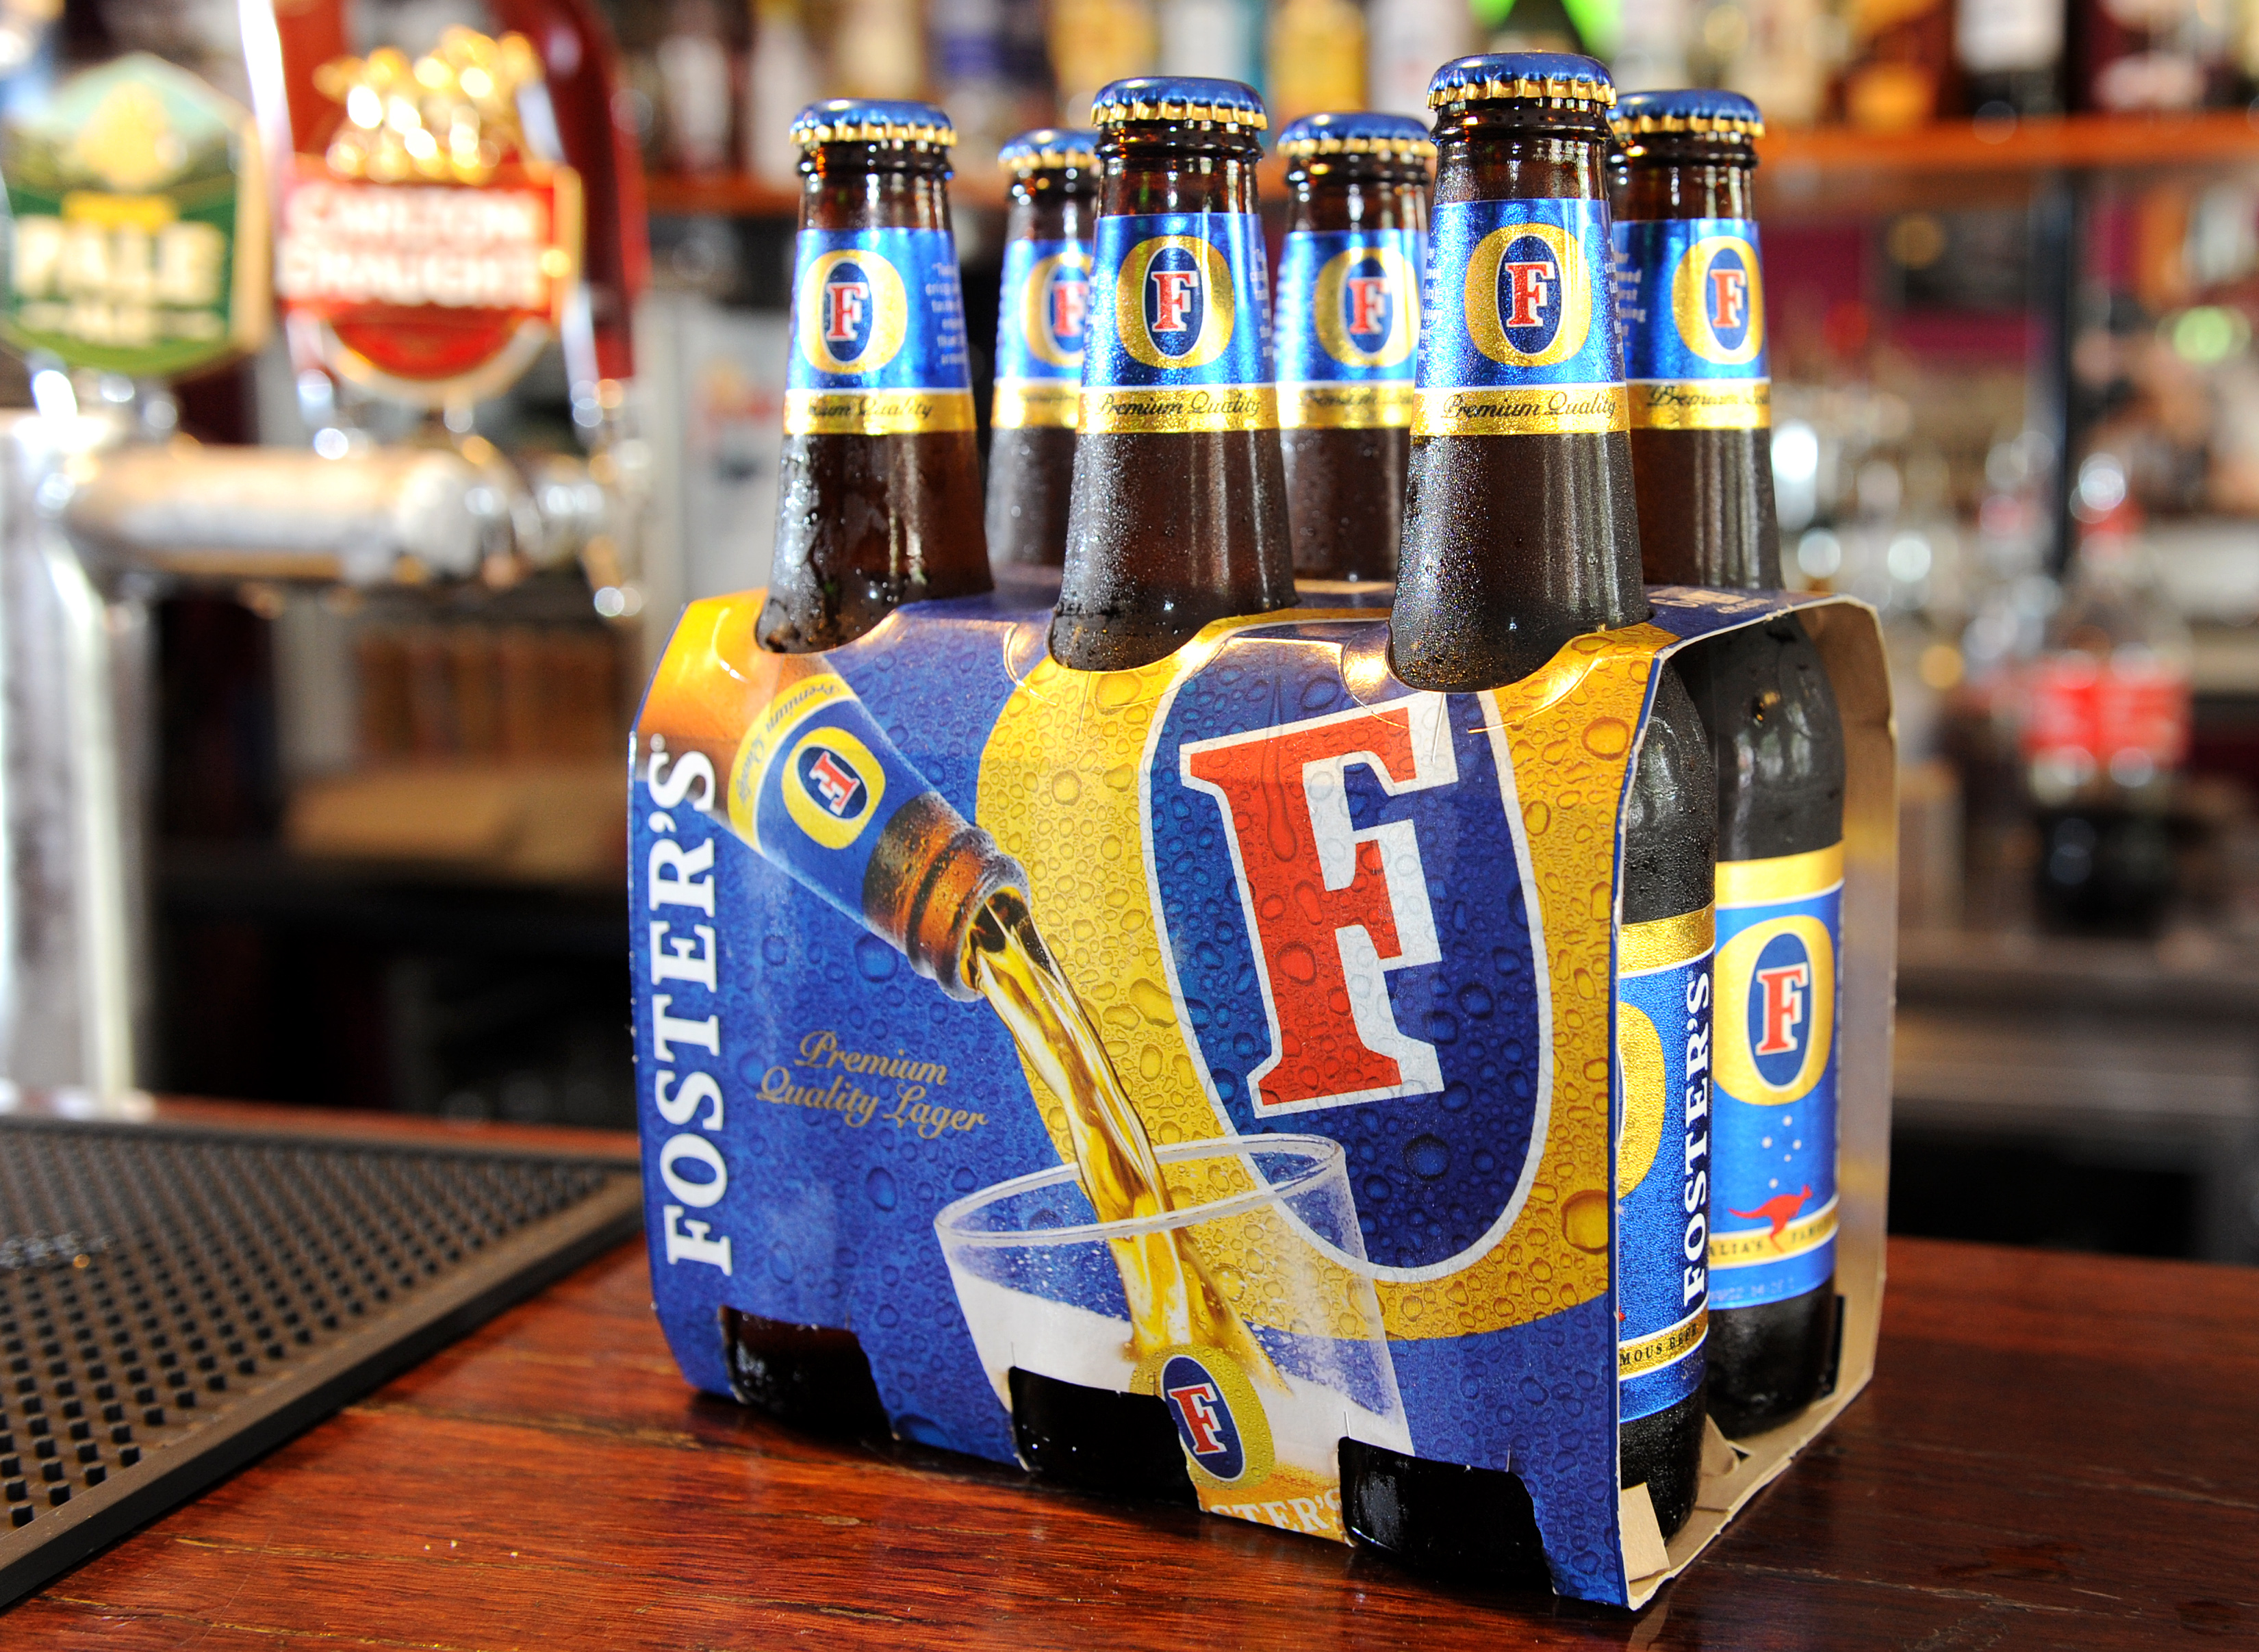 Bottles of Foster's beer sits on the bar